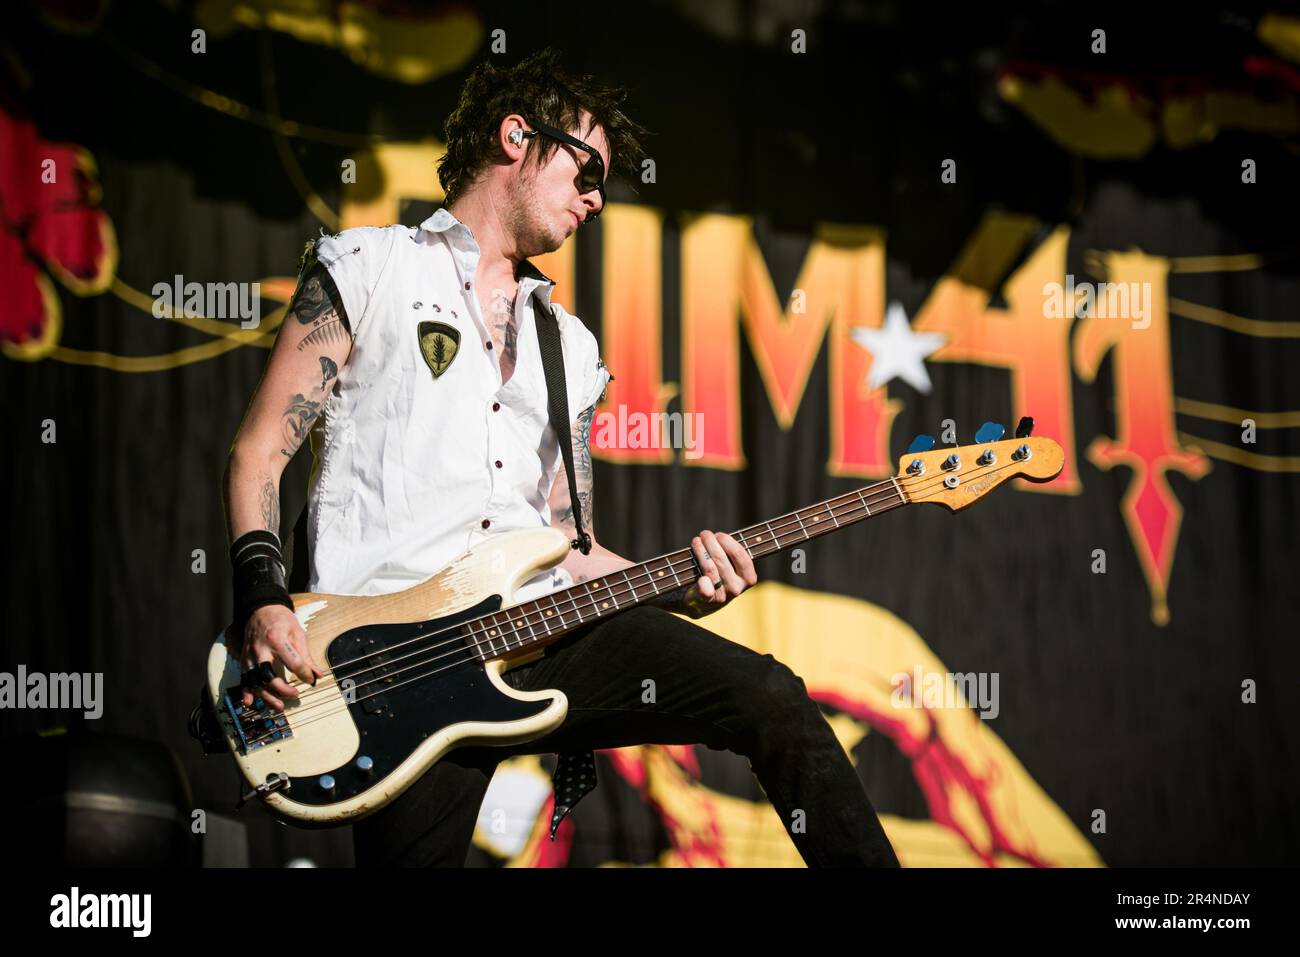 FLORENCE, ITALY, FIRENZE ROCKS FESTIVAL: Cone McCaslin, bassist of the Canadian punk rock band SUM41, performing live on stage at the Firenze Rocks festival Stock Photo